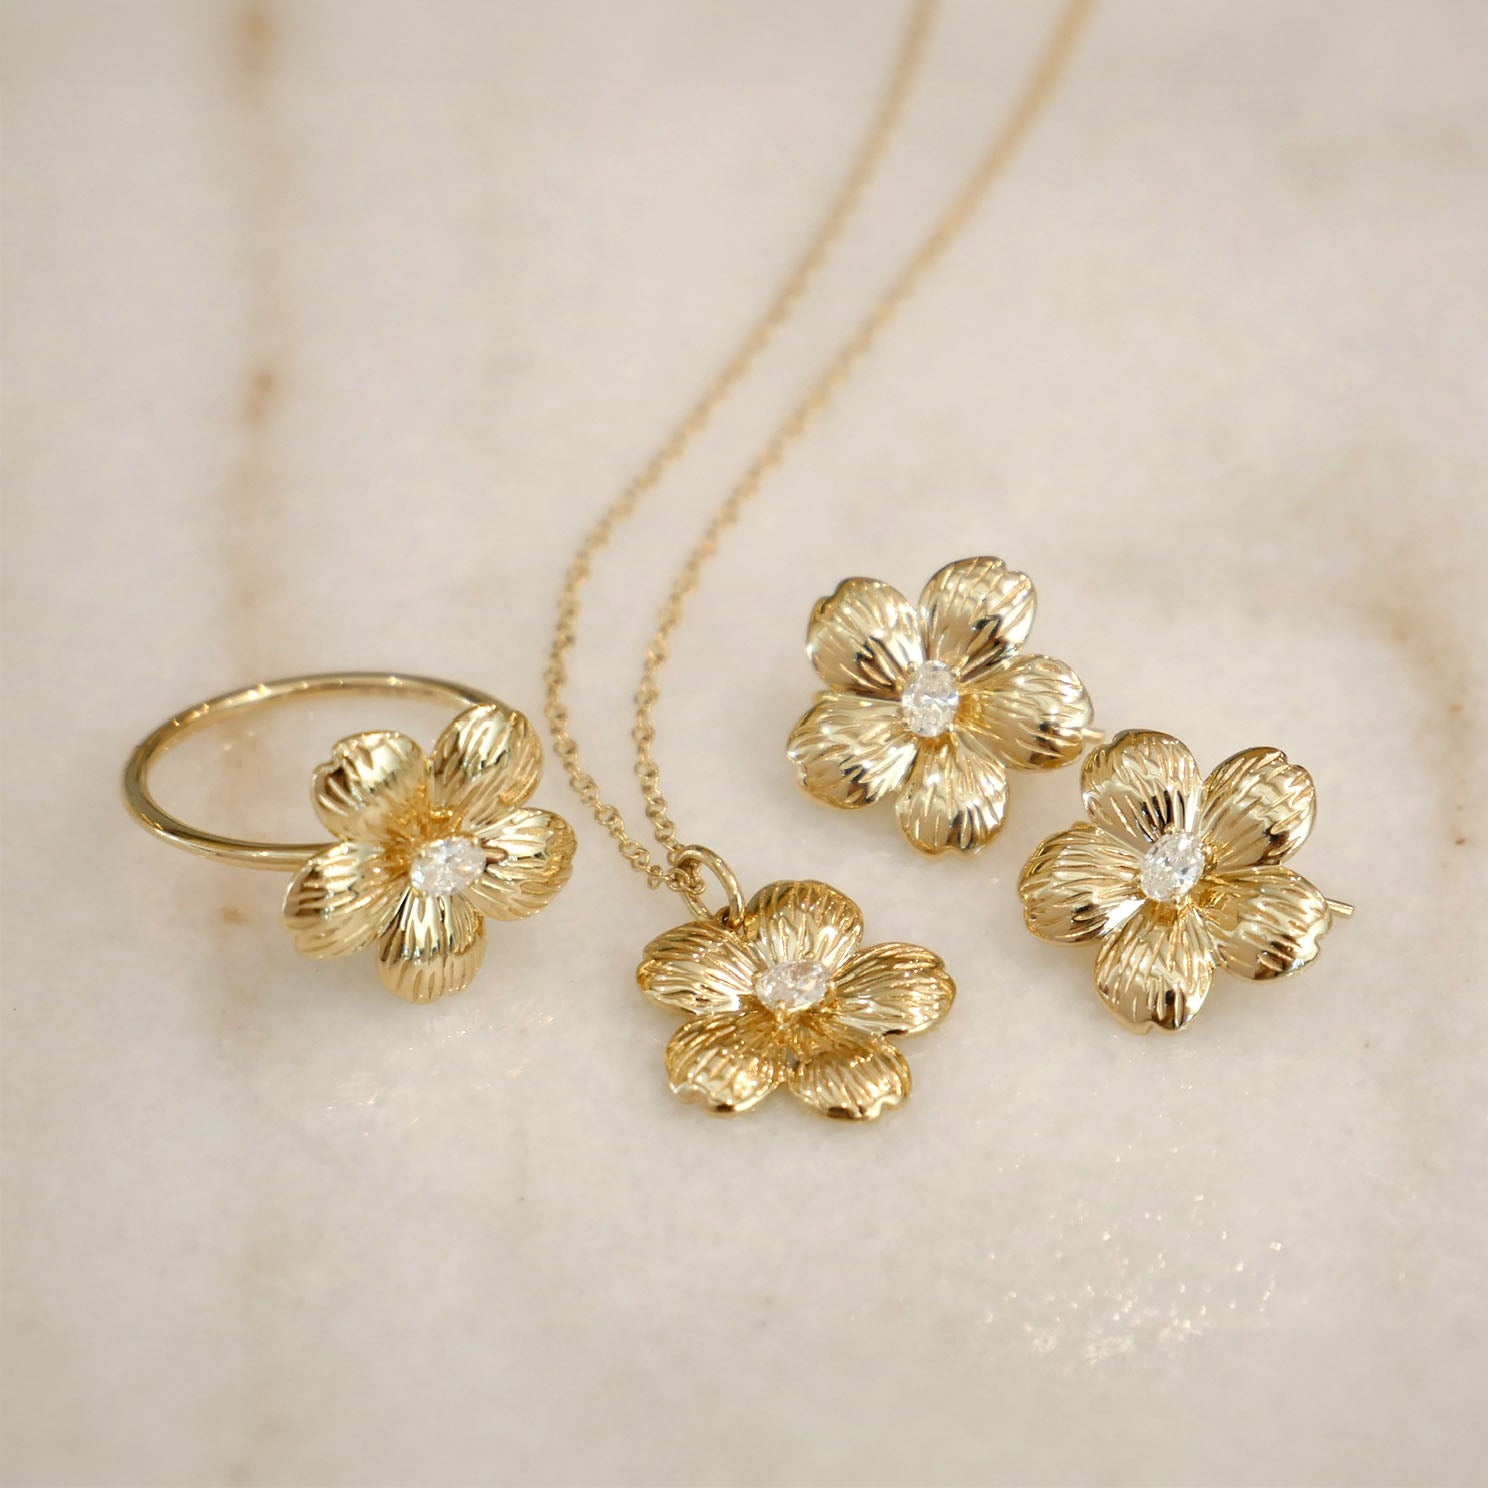 Cherry Blossom Ring in 14k yellow gold next to Cherry Blossom Necklace and Cherry Blossom Earrings